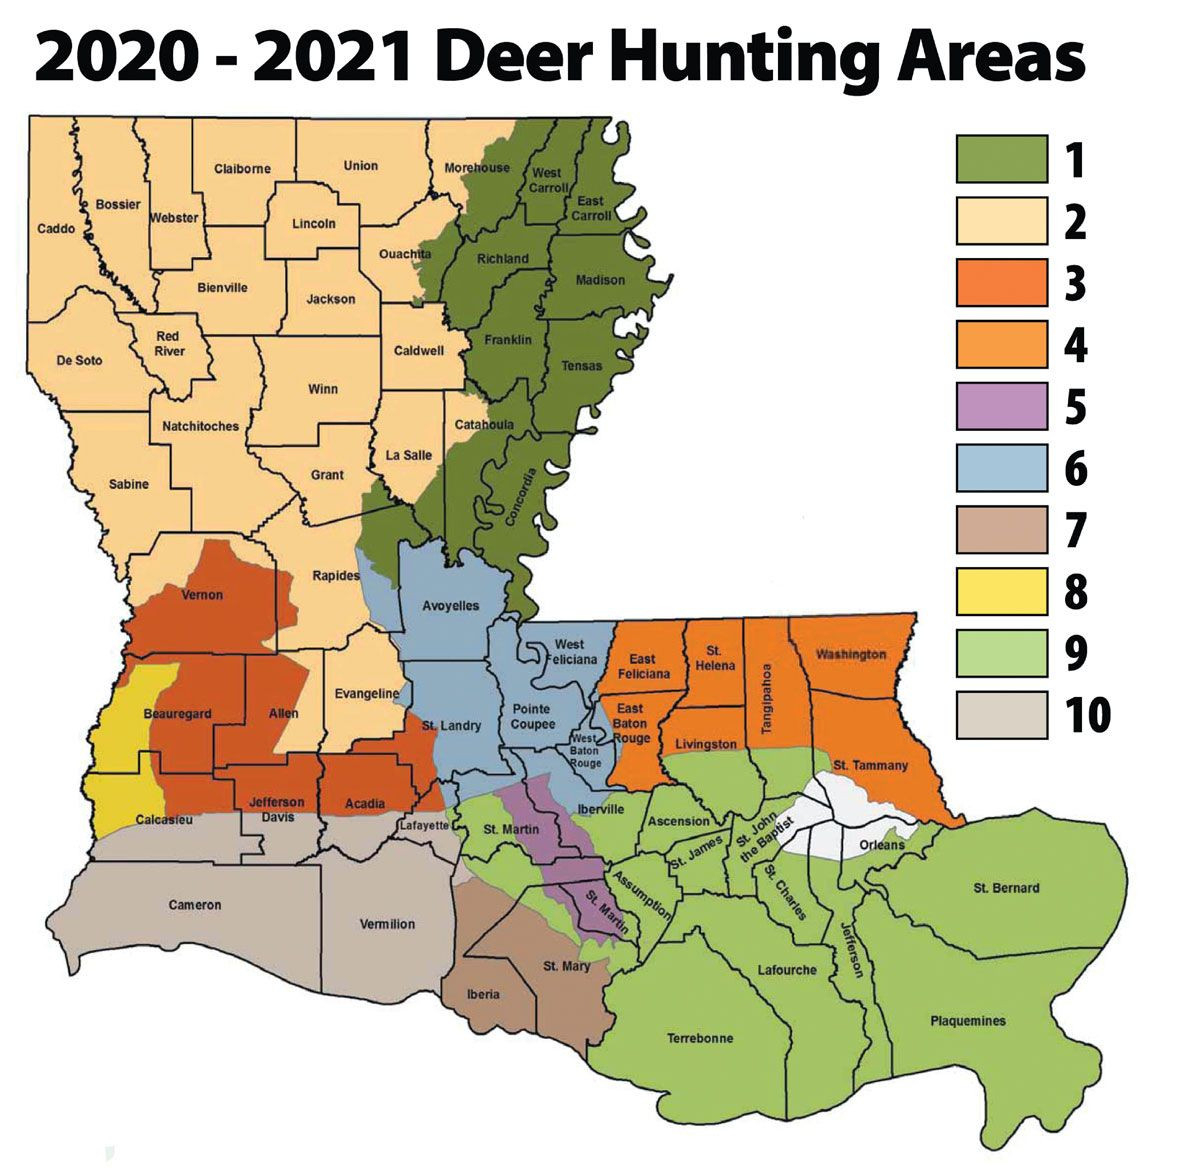 Louisiana&#039;S 2020 Rut Report - Louisiana Sportsman Inside-Stages Of The 2021 Whitetail Rut